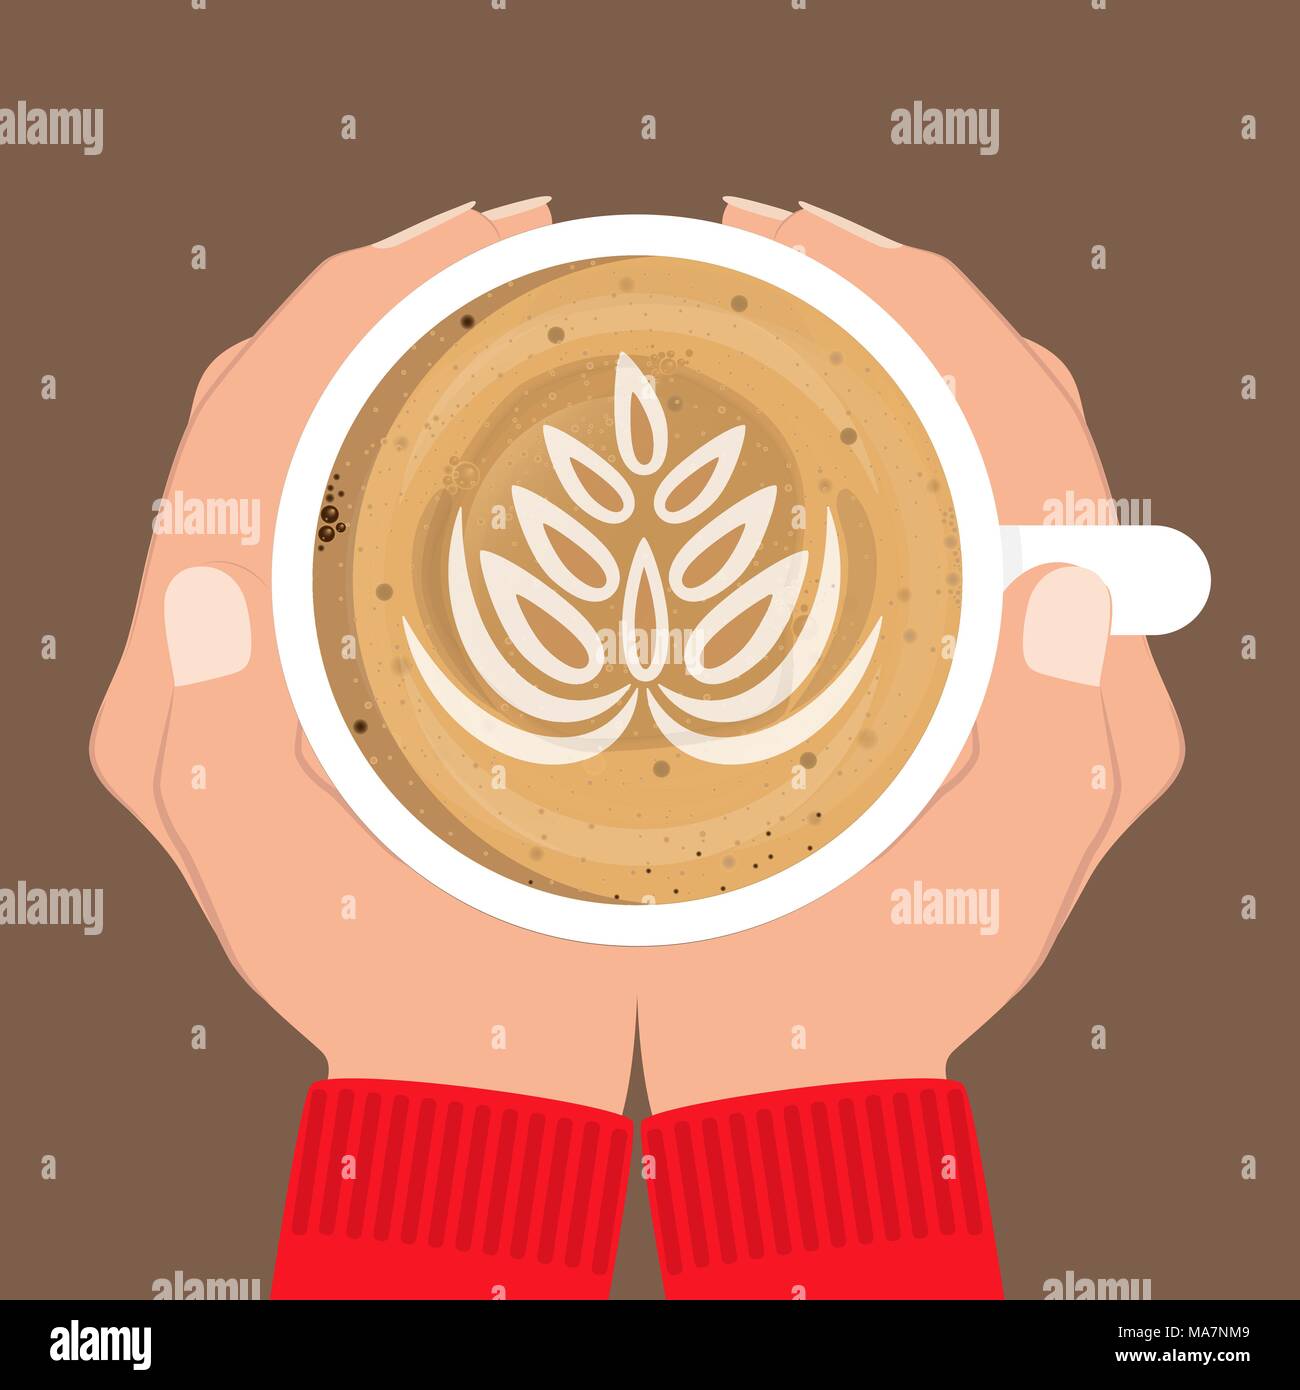 Hands holding a cup of coffee. Two hands grasping a cup of coffee. Vector illustration Stock Vector